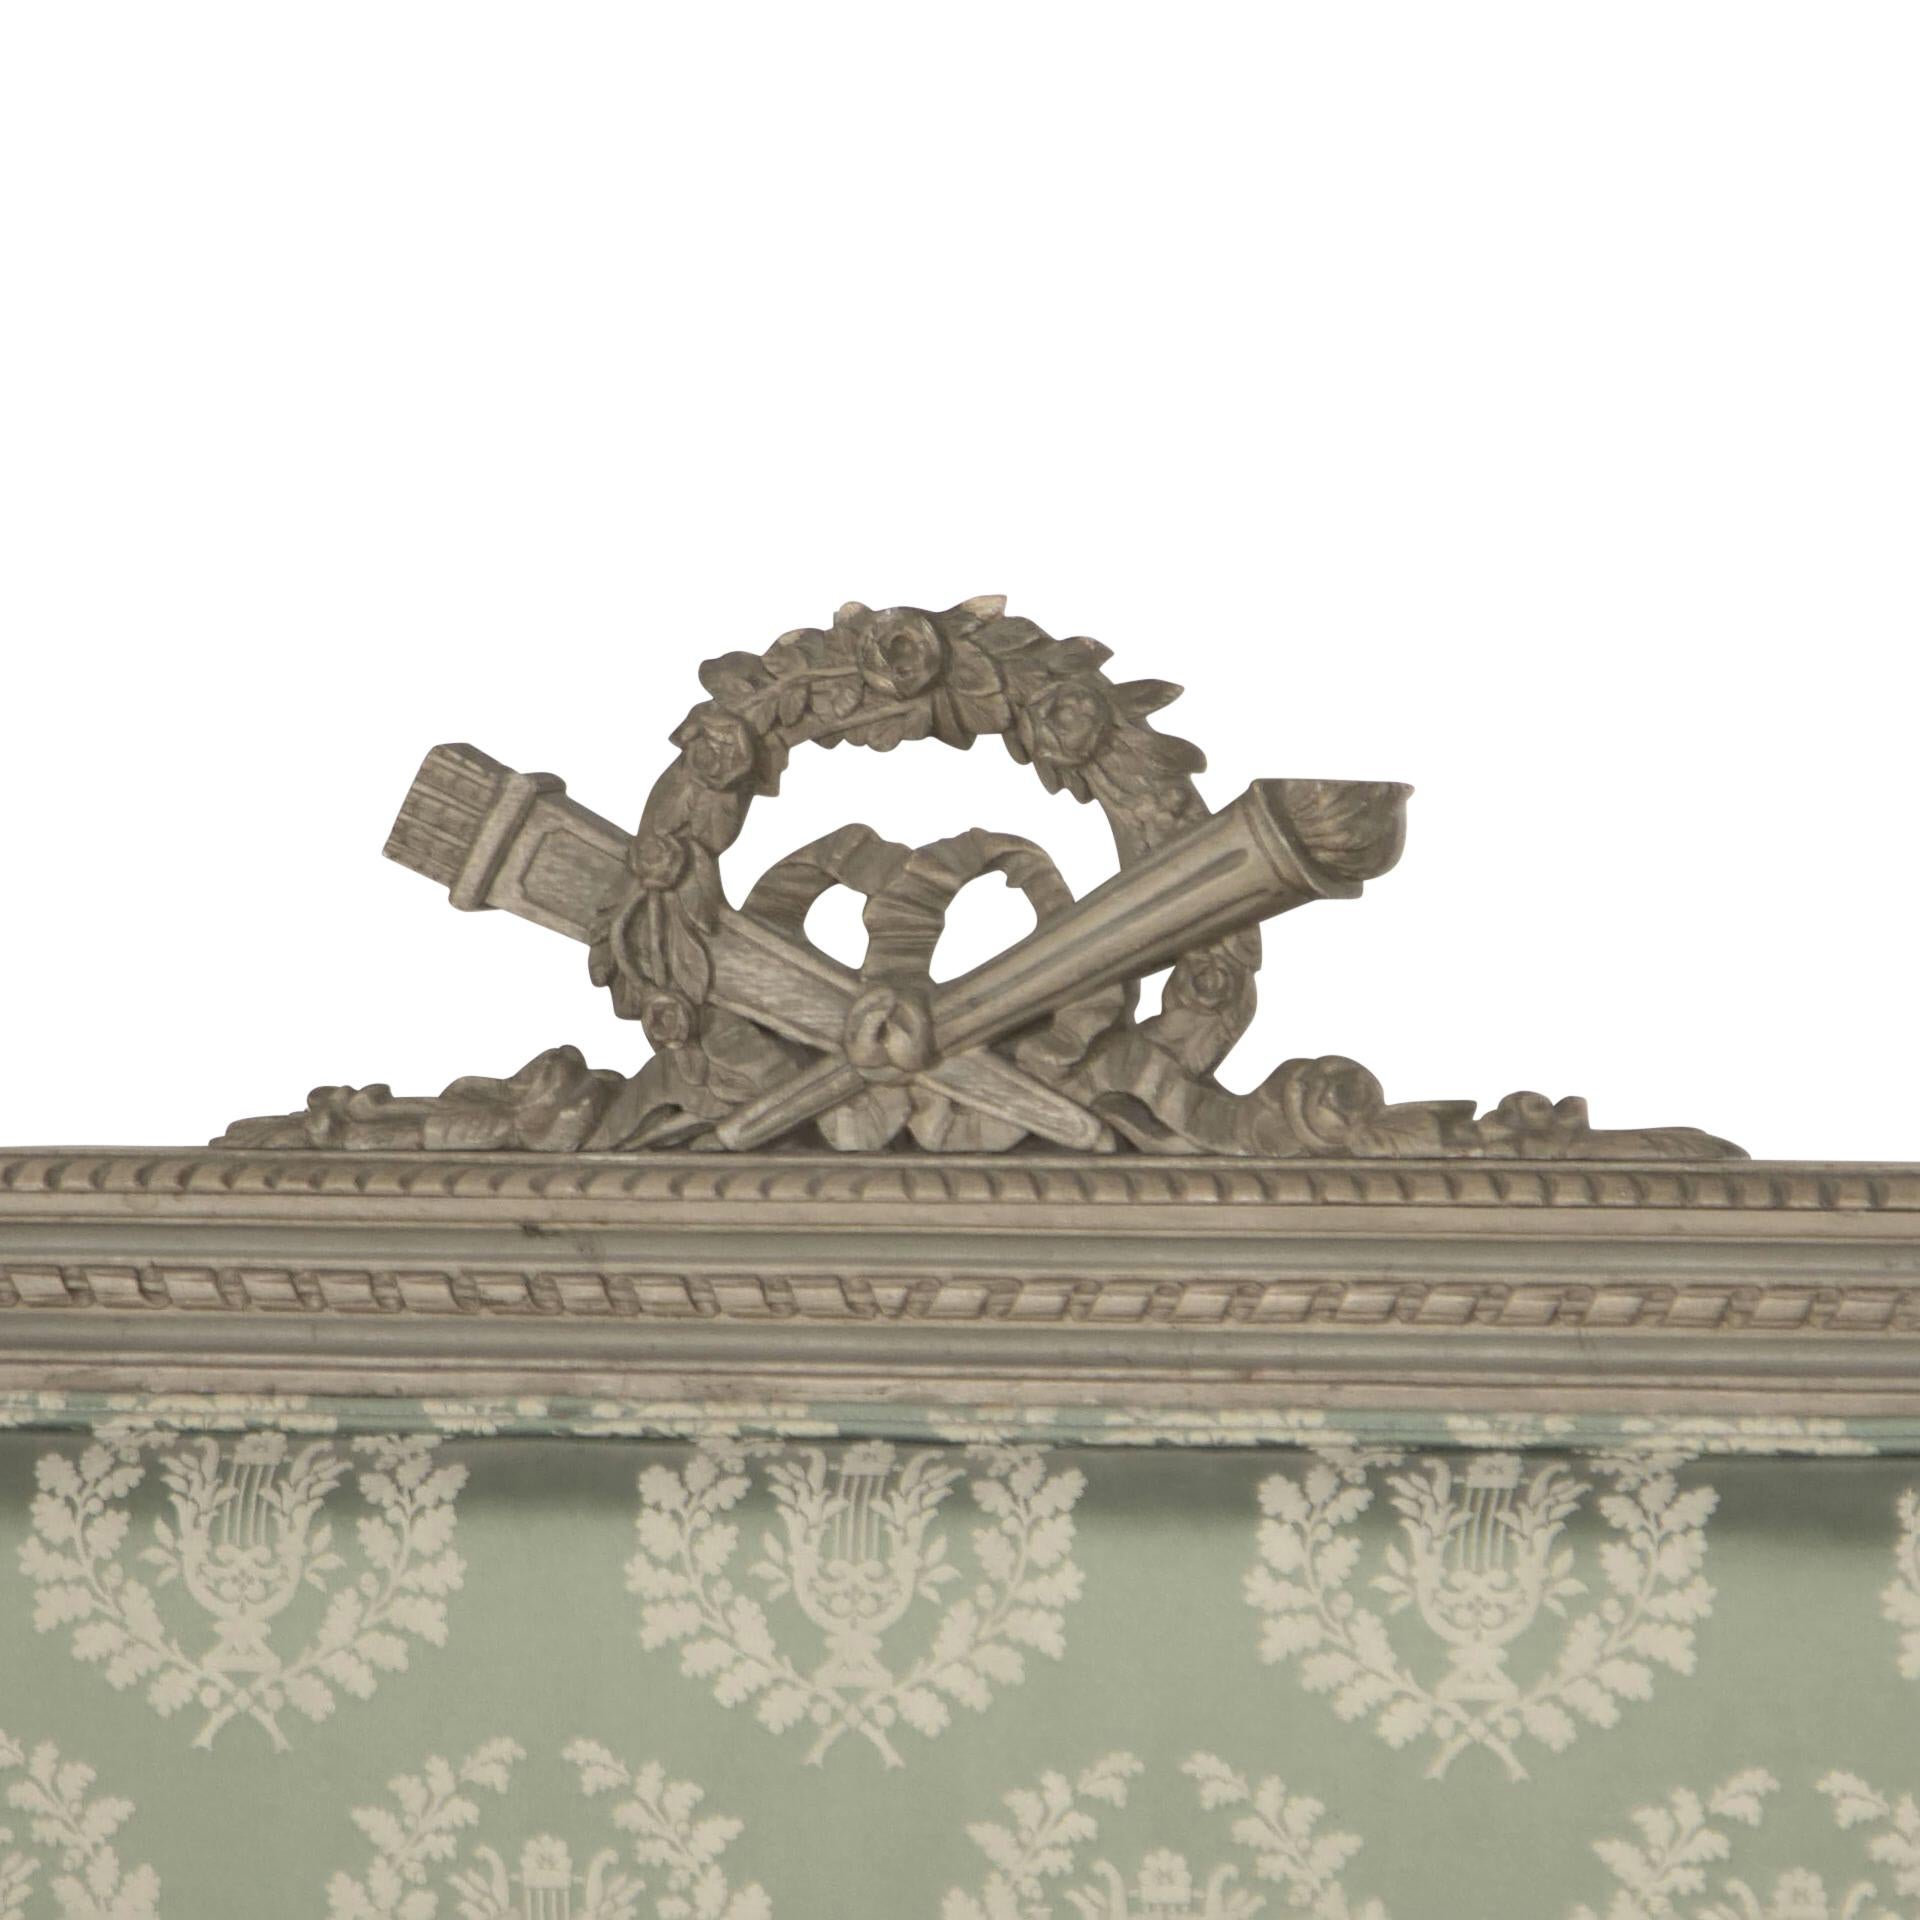 19th century French Louis 16th style bed, decorative carved design, painted, upholstered in vintage laurel wreath. 
Design fabric by Design Archive.